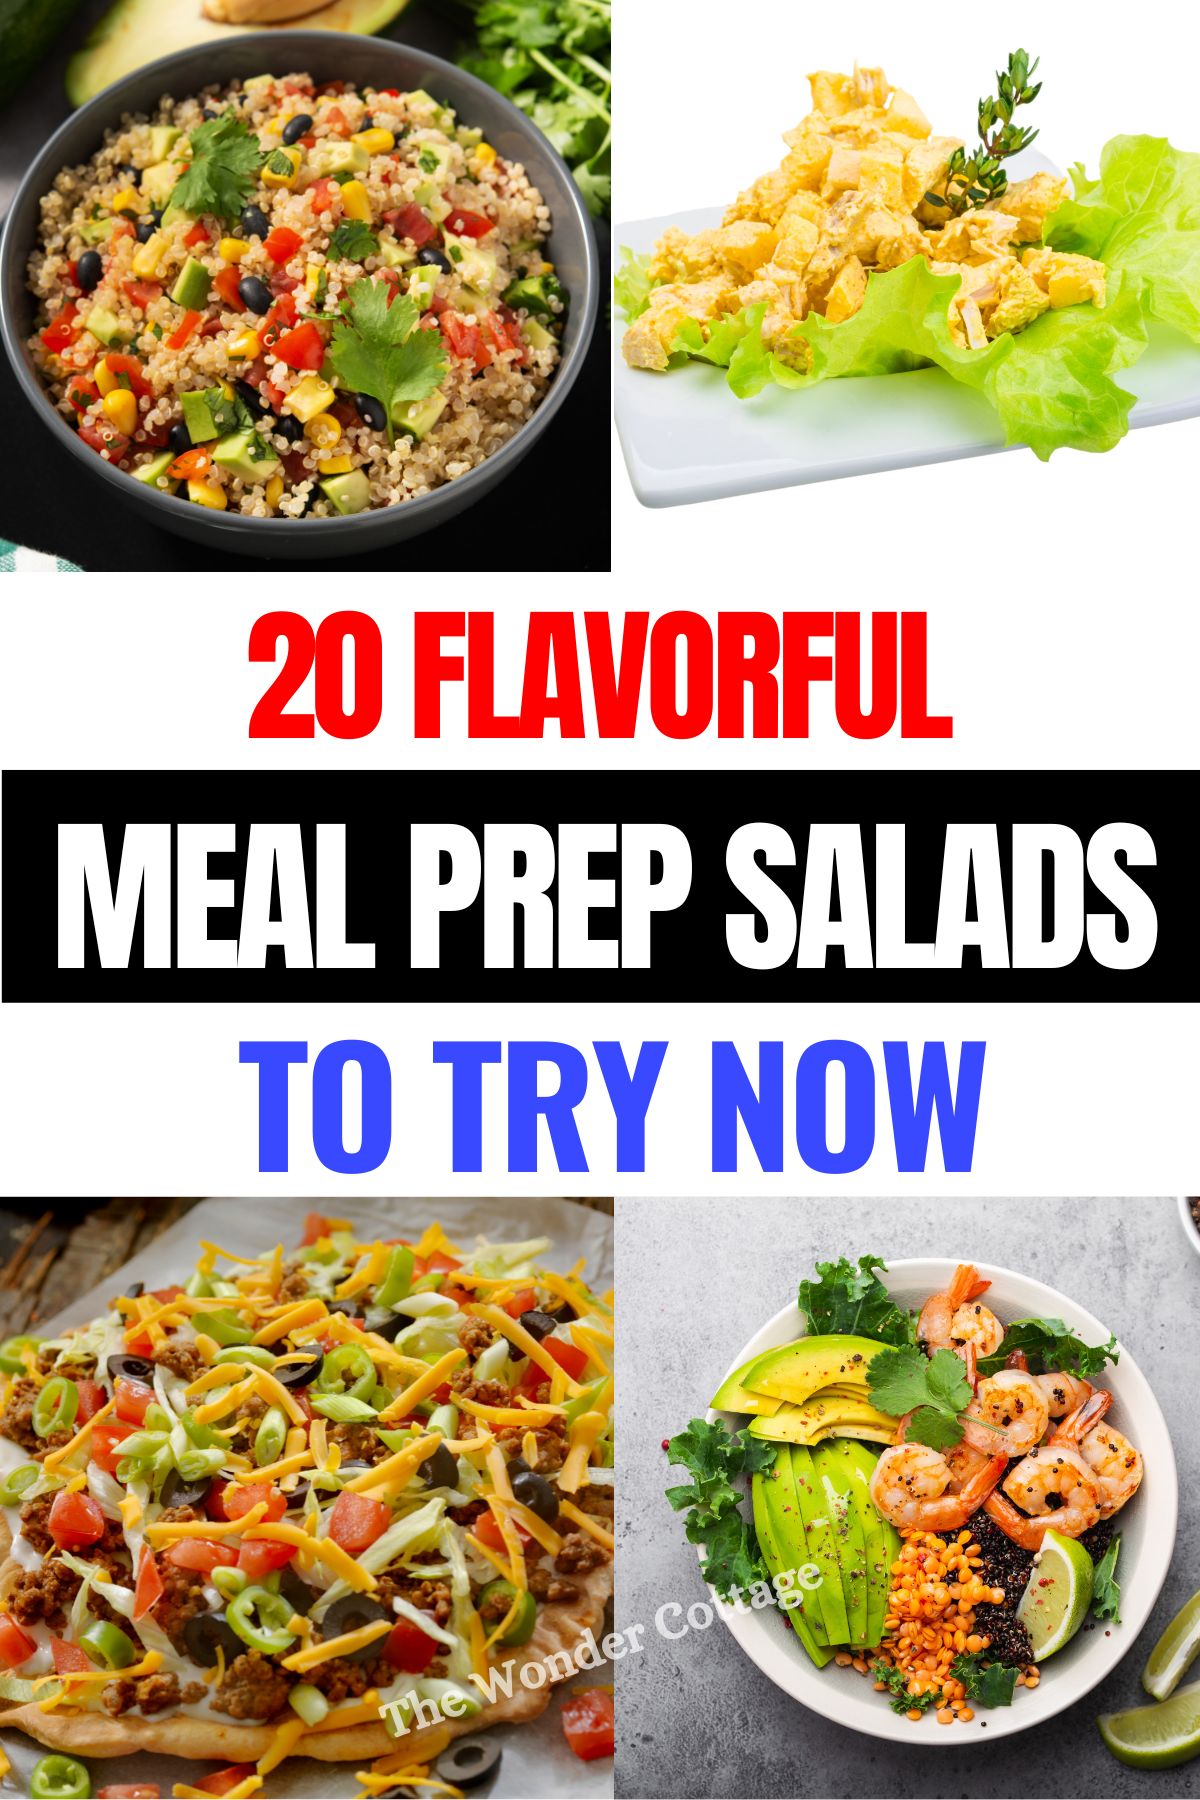 20 Flavorful Meal Prep Salads To Try Now